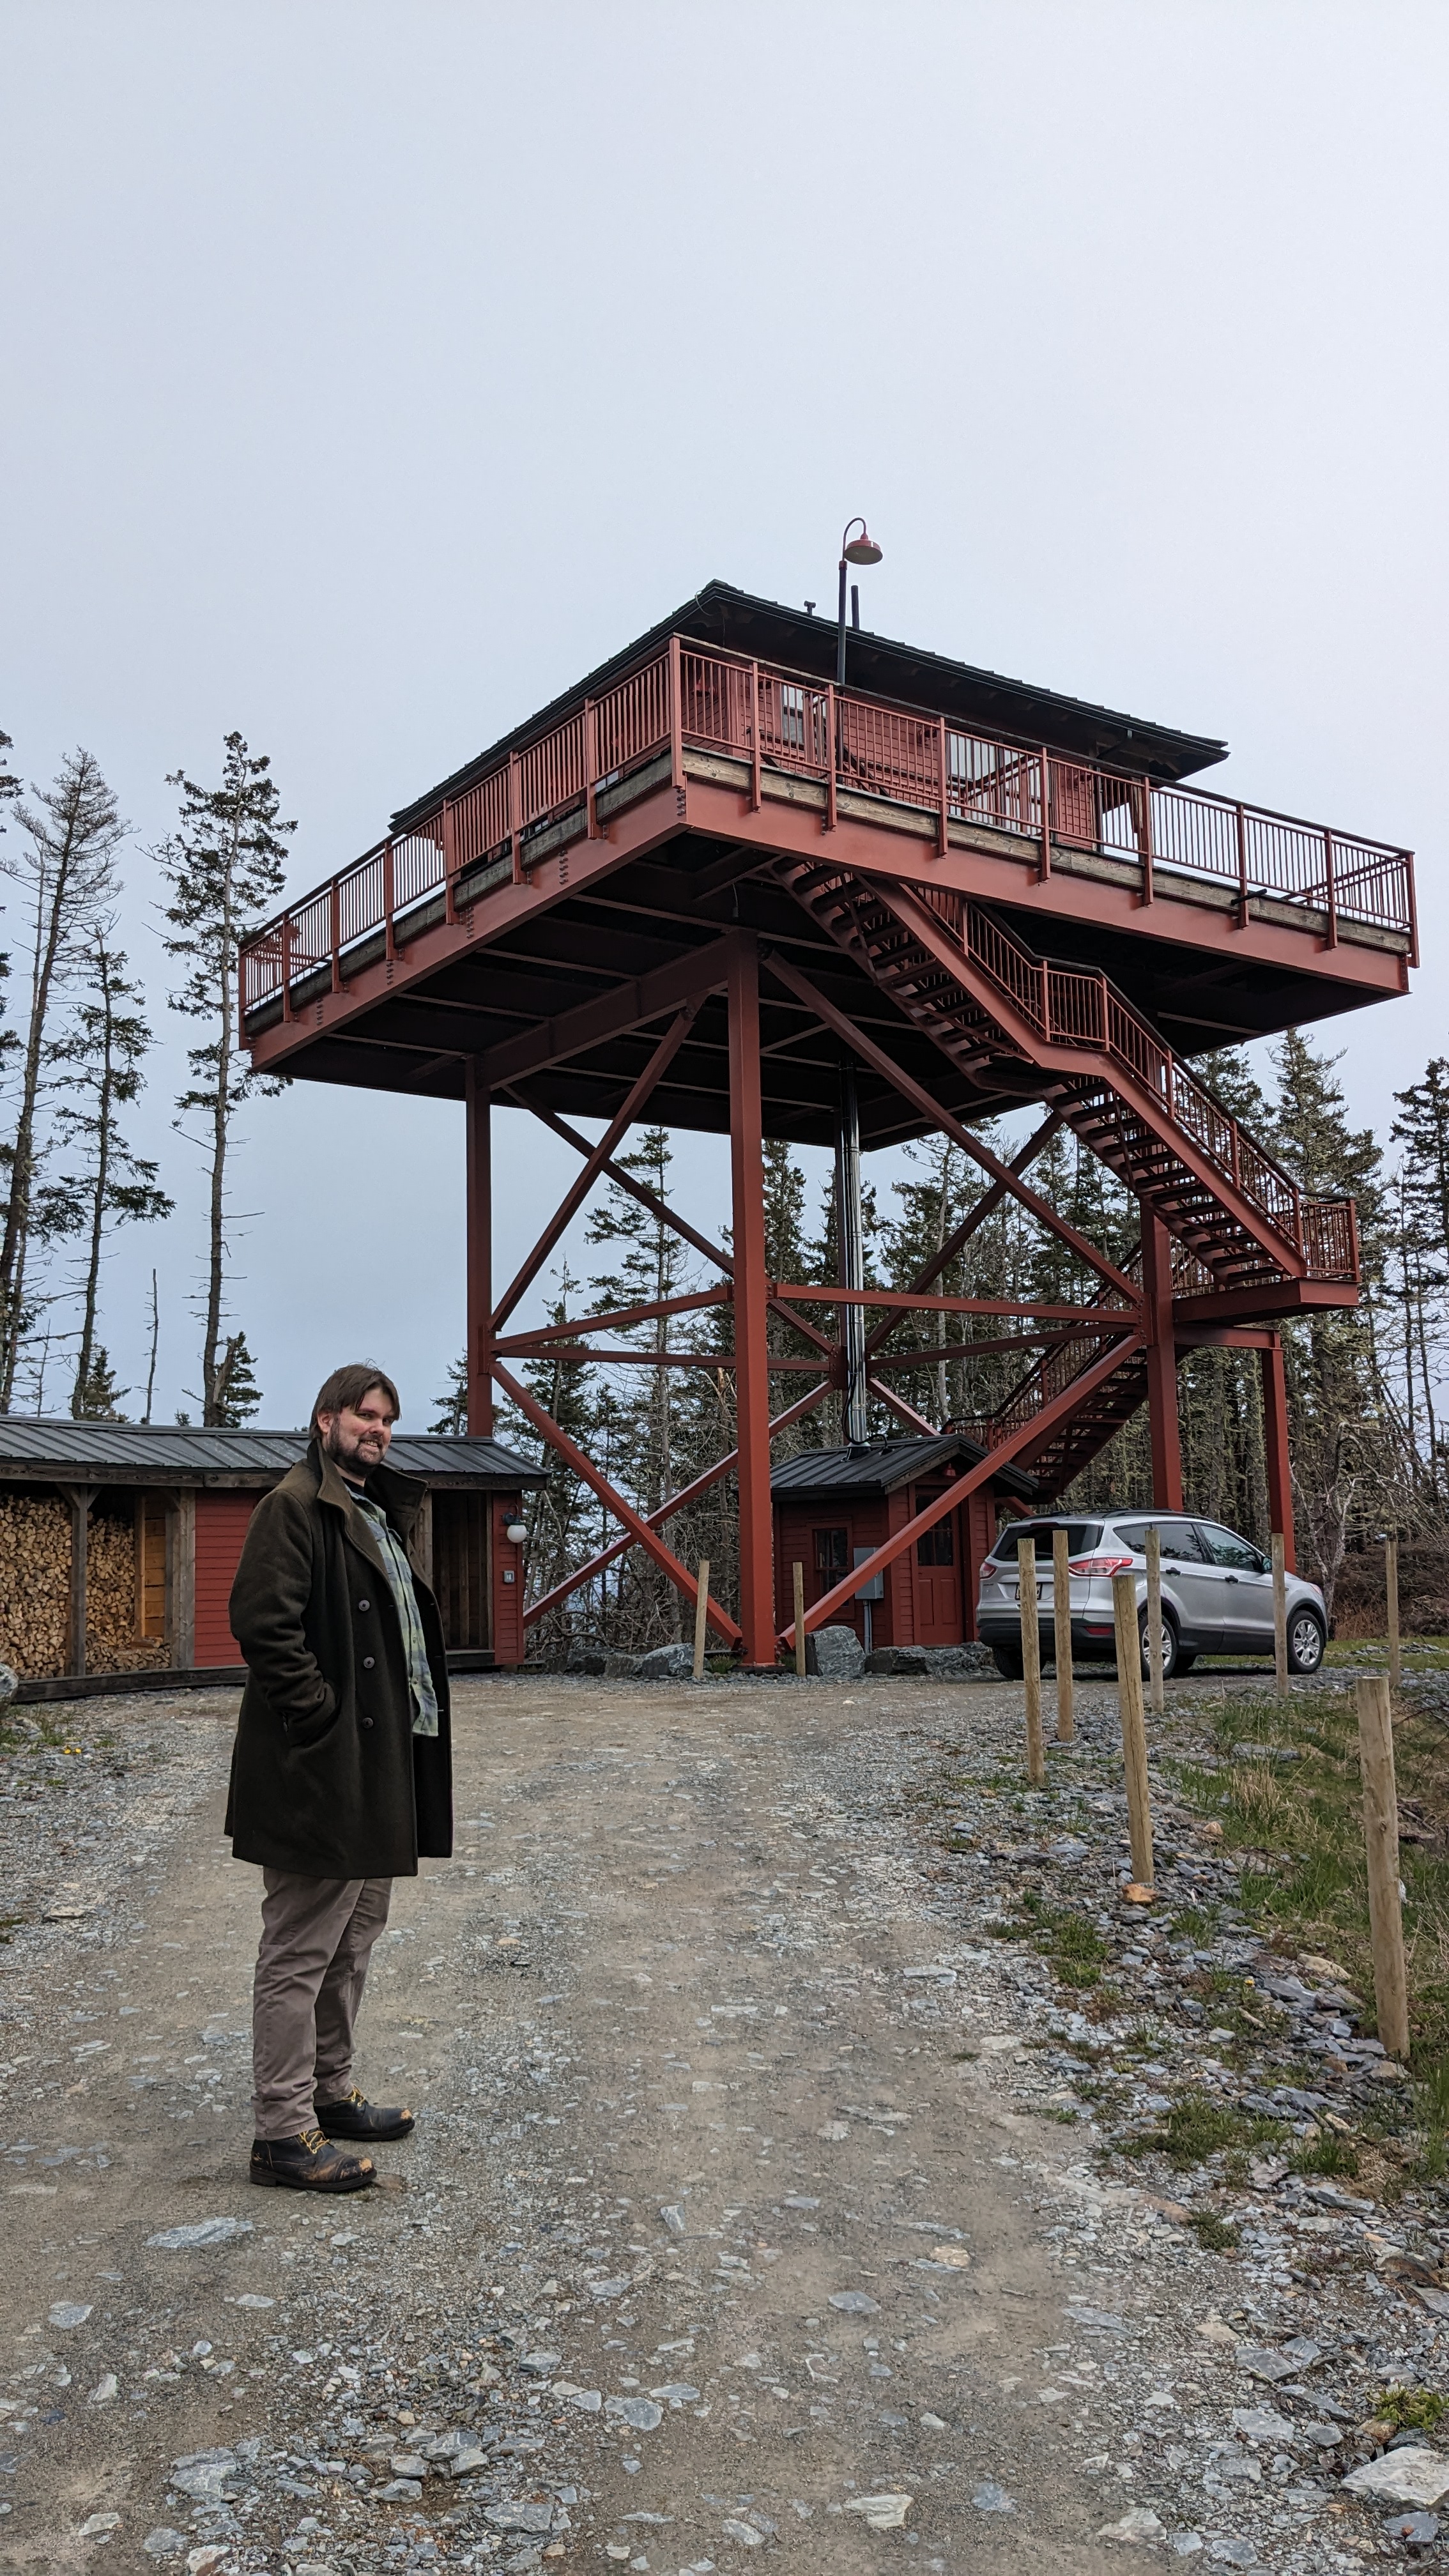 Magill at the base of the fire watch tower.